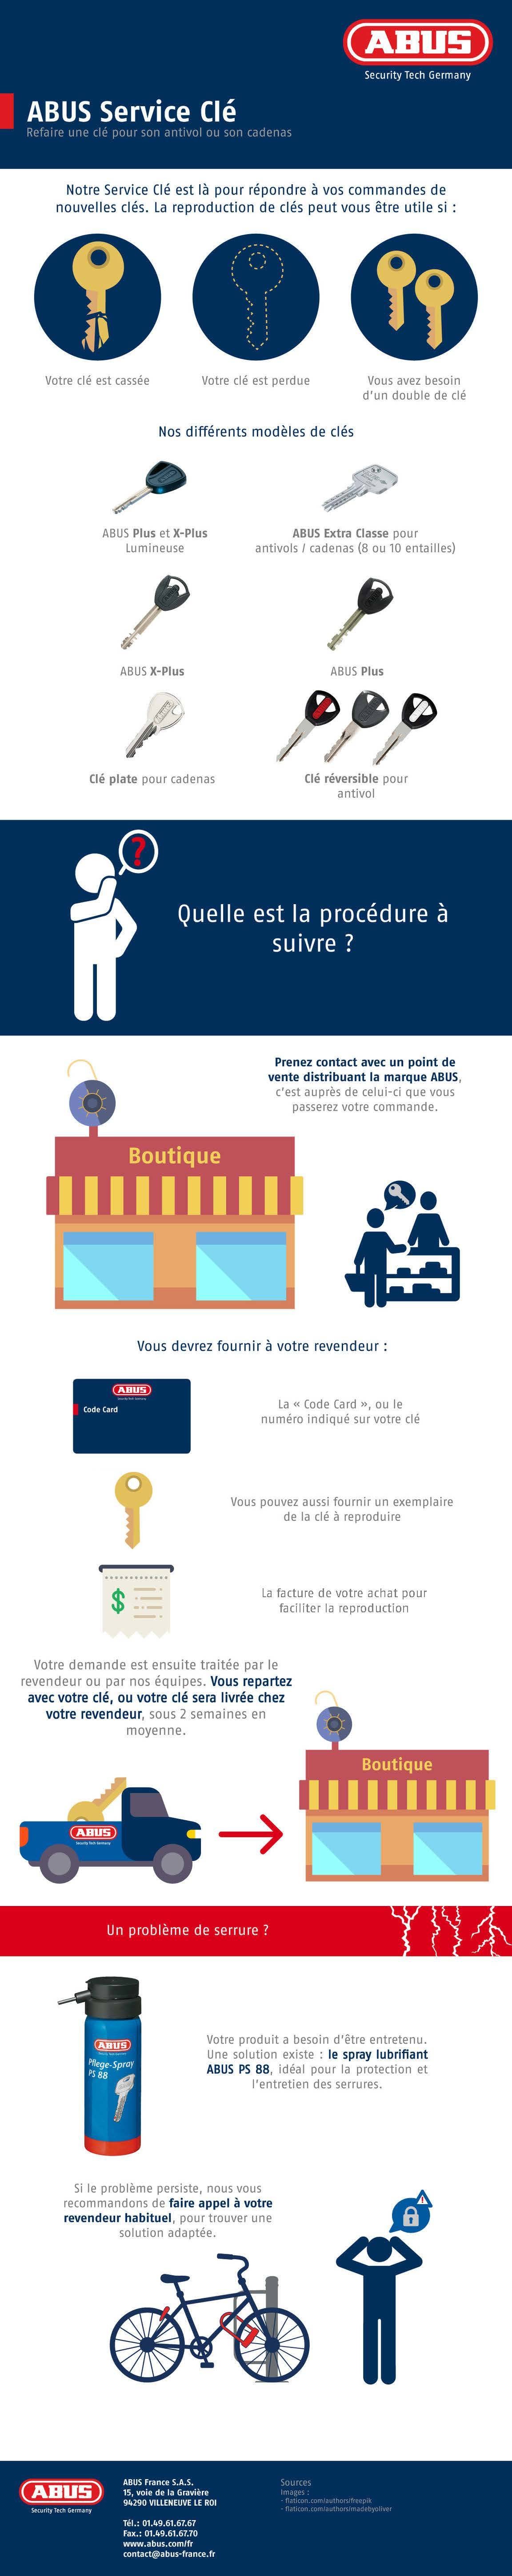 Infographie-ABUS-Service-Cle_image_4col